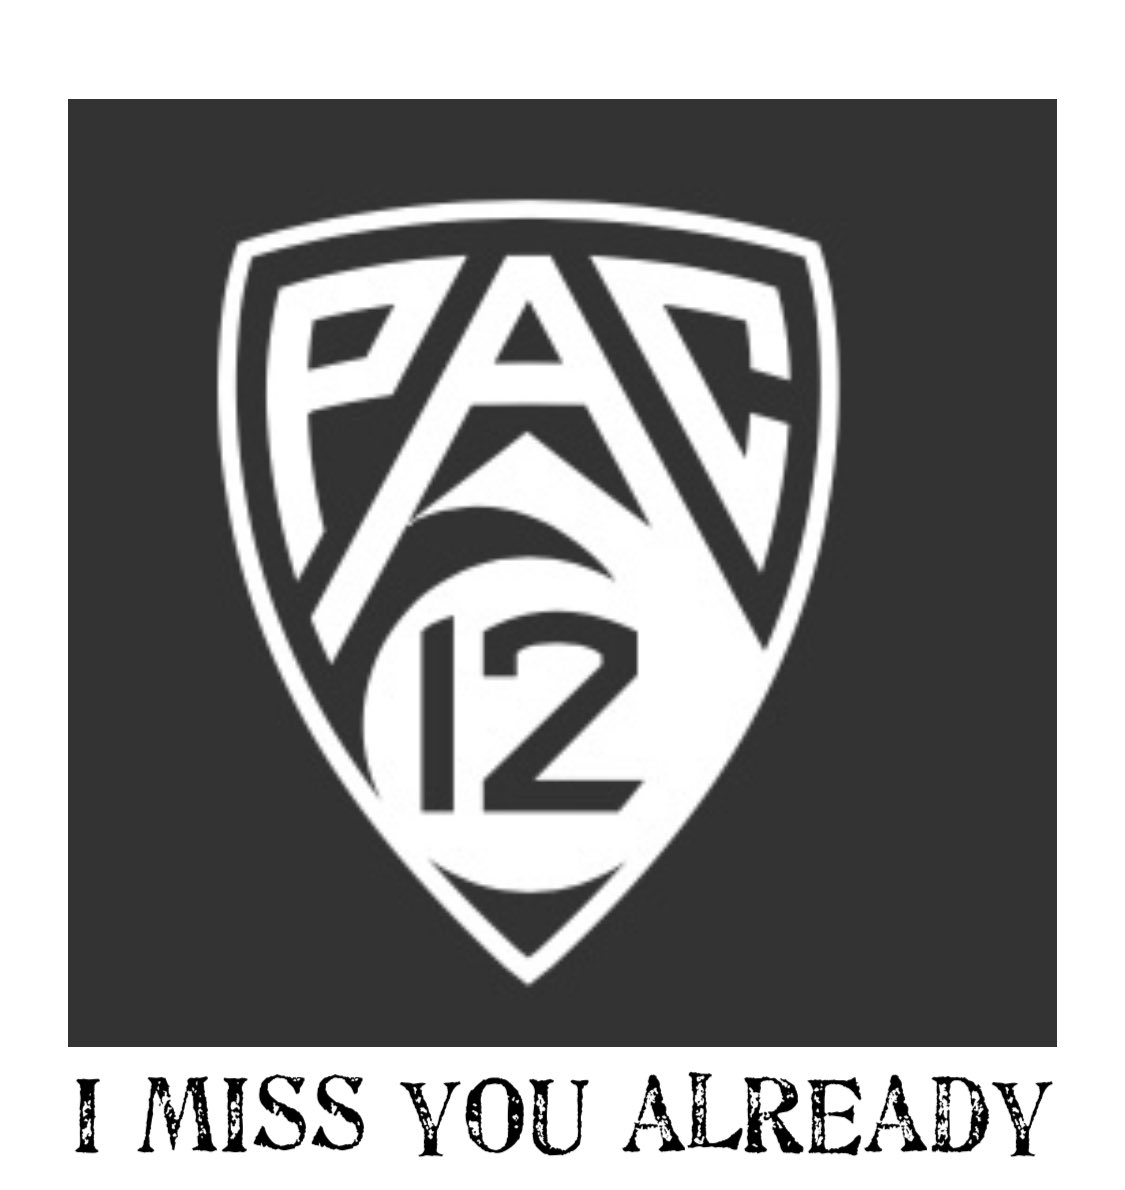 @LO_Pac12 @Pac12Network @Pac12Football @pac12 @PAC12Barstool @Pac12Compliance @jthornby